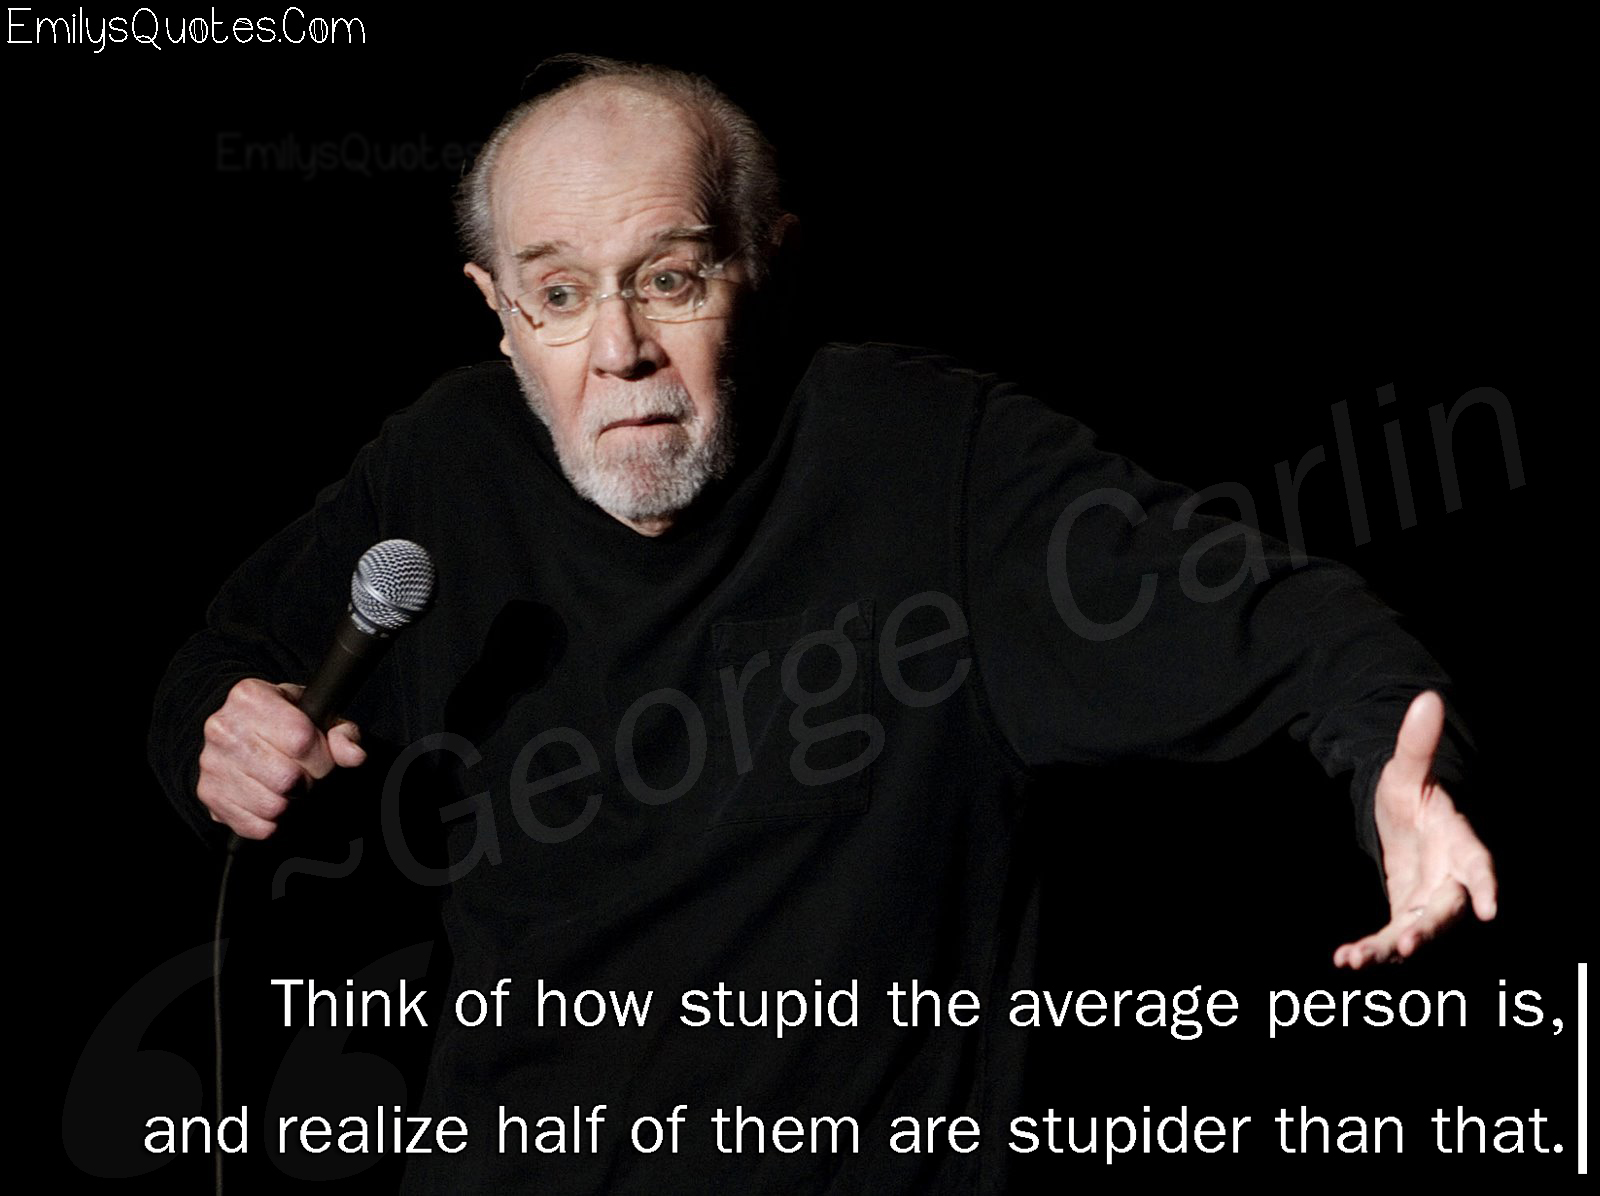 Think of how stupid the average person is, and realize half of them are stupider than that